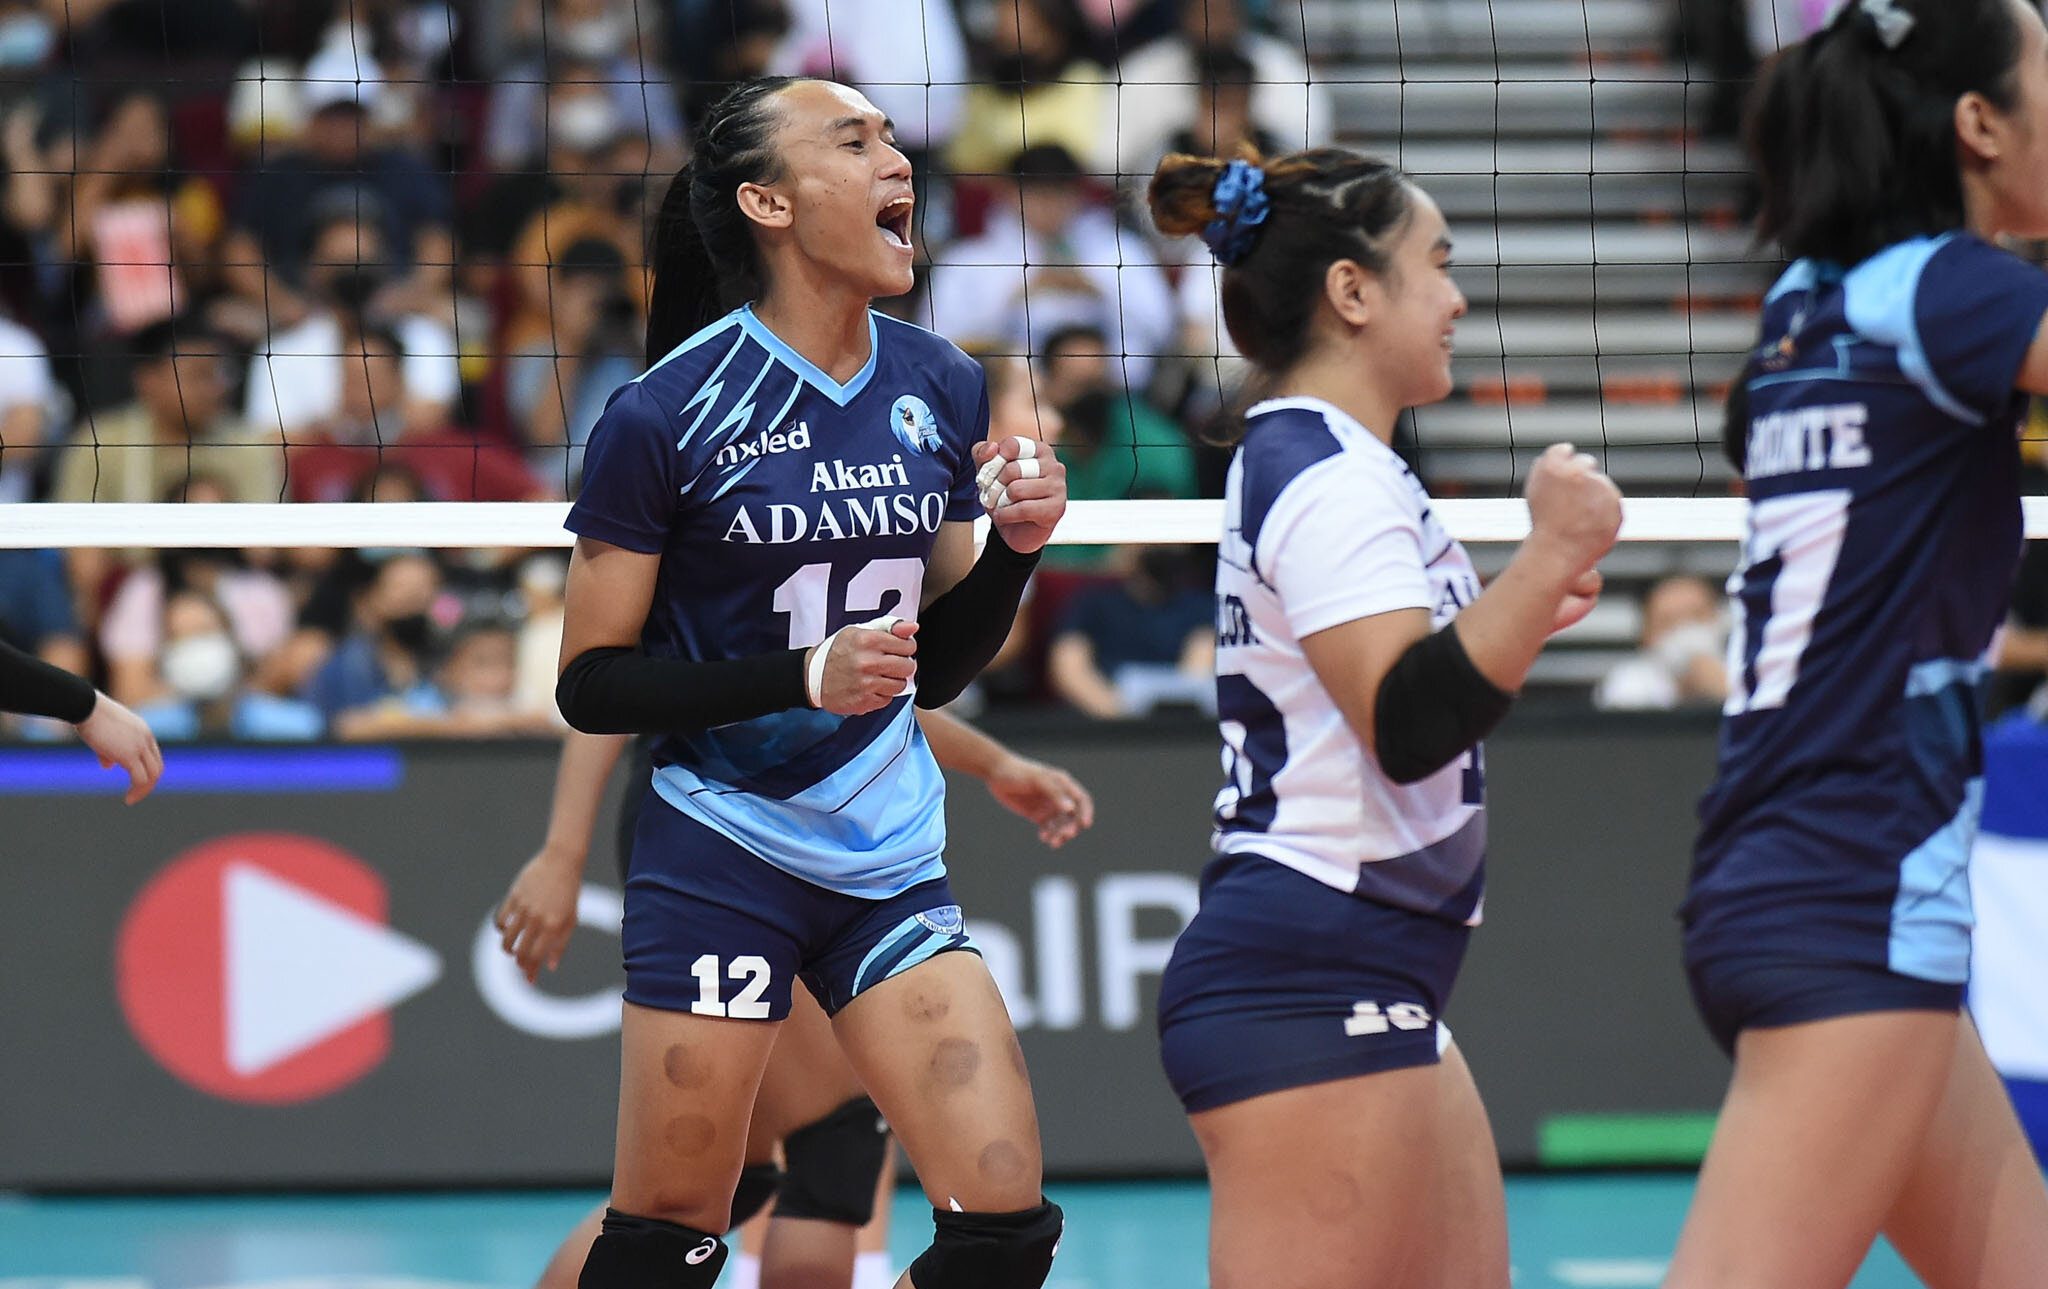 Trolls, tributes all part of the game for Adamson rookie Trisha Tubu